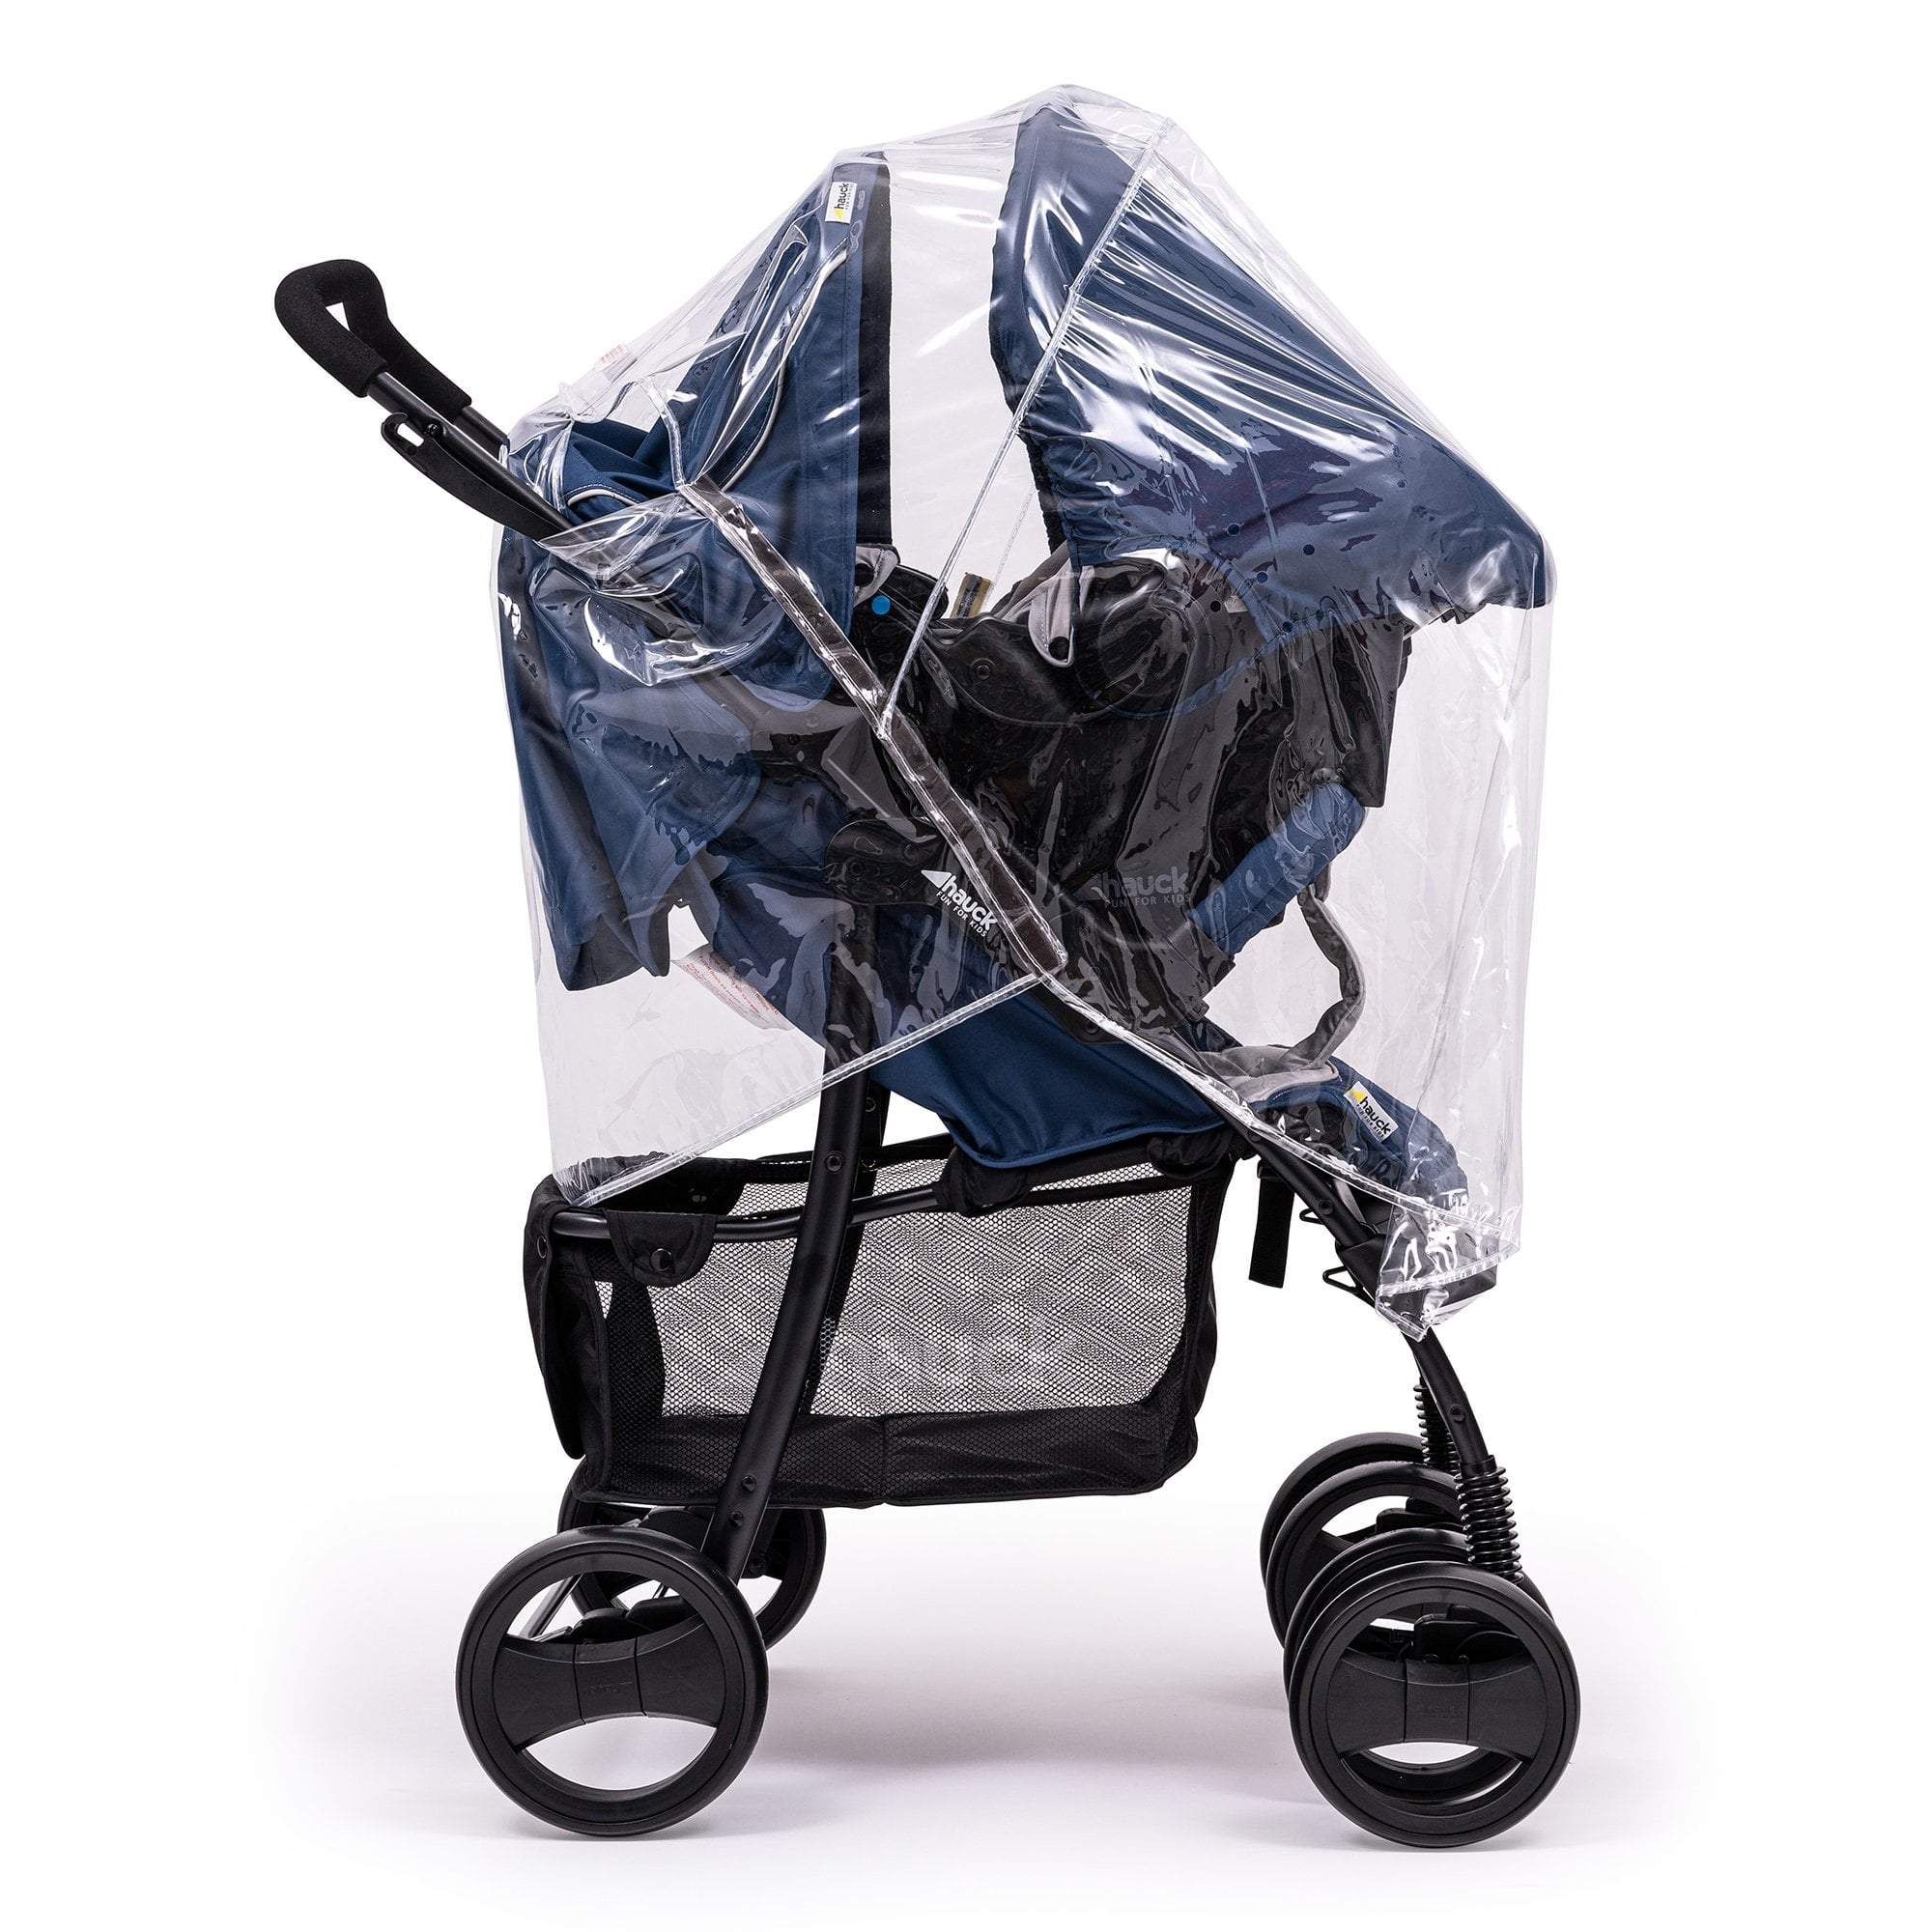 Travel System Raincover Compatible with Easywalker - Fits All Models - For Your Little One